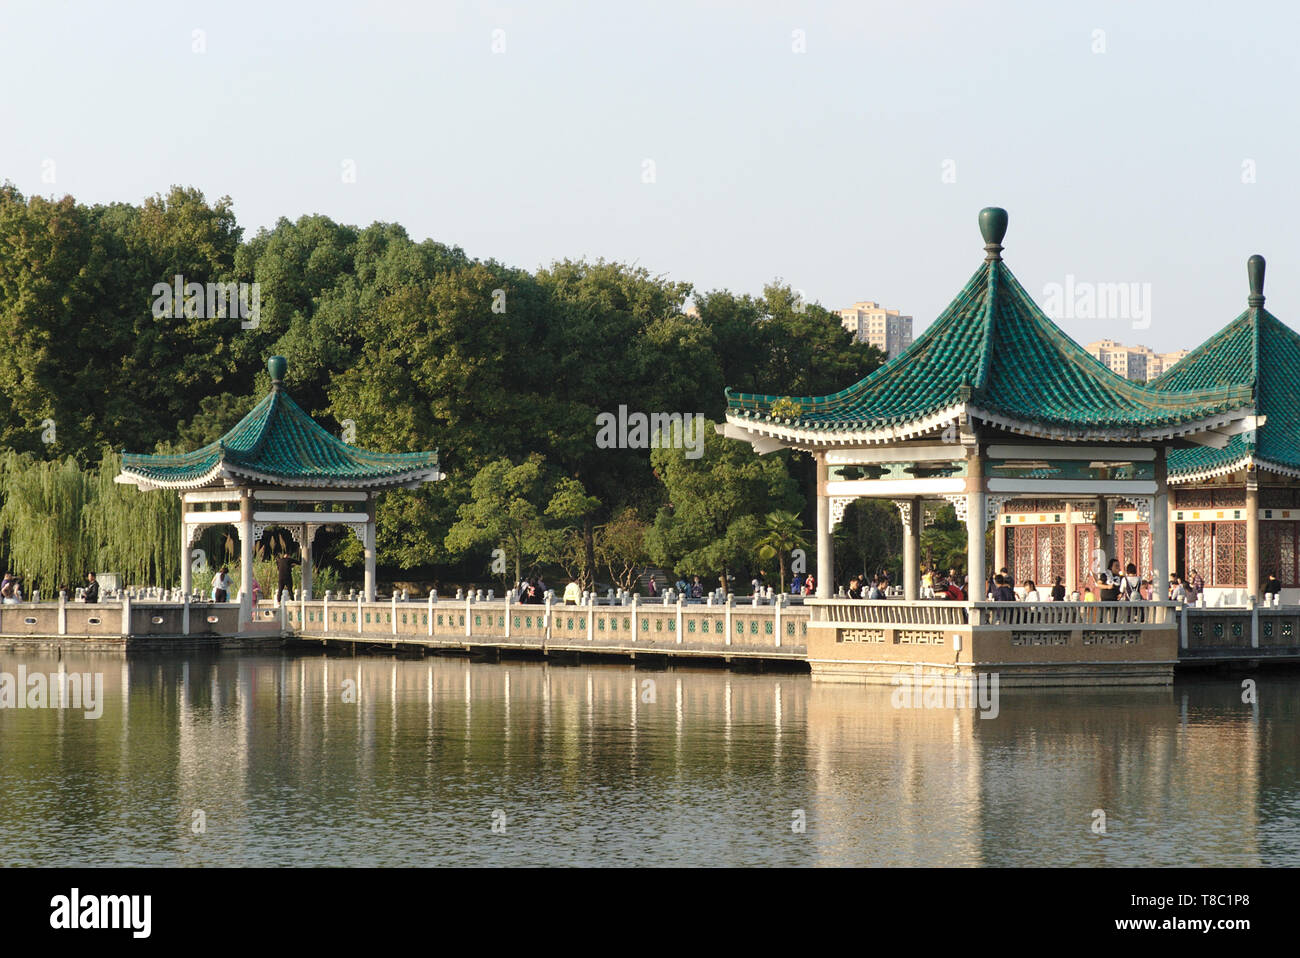 Pavilions with walking local people, East Lake scenic area, Wuhan, China Stock Photo